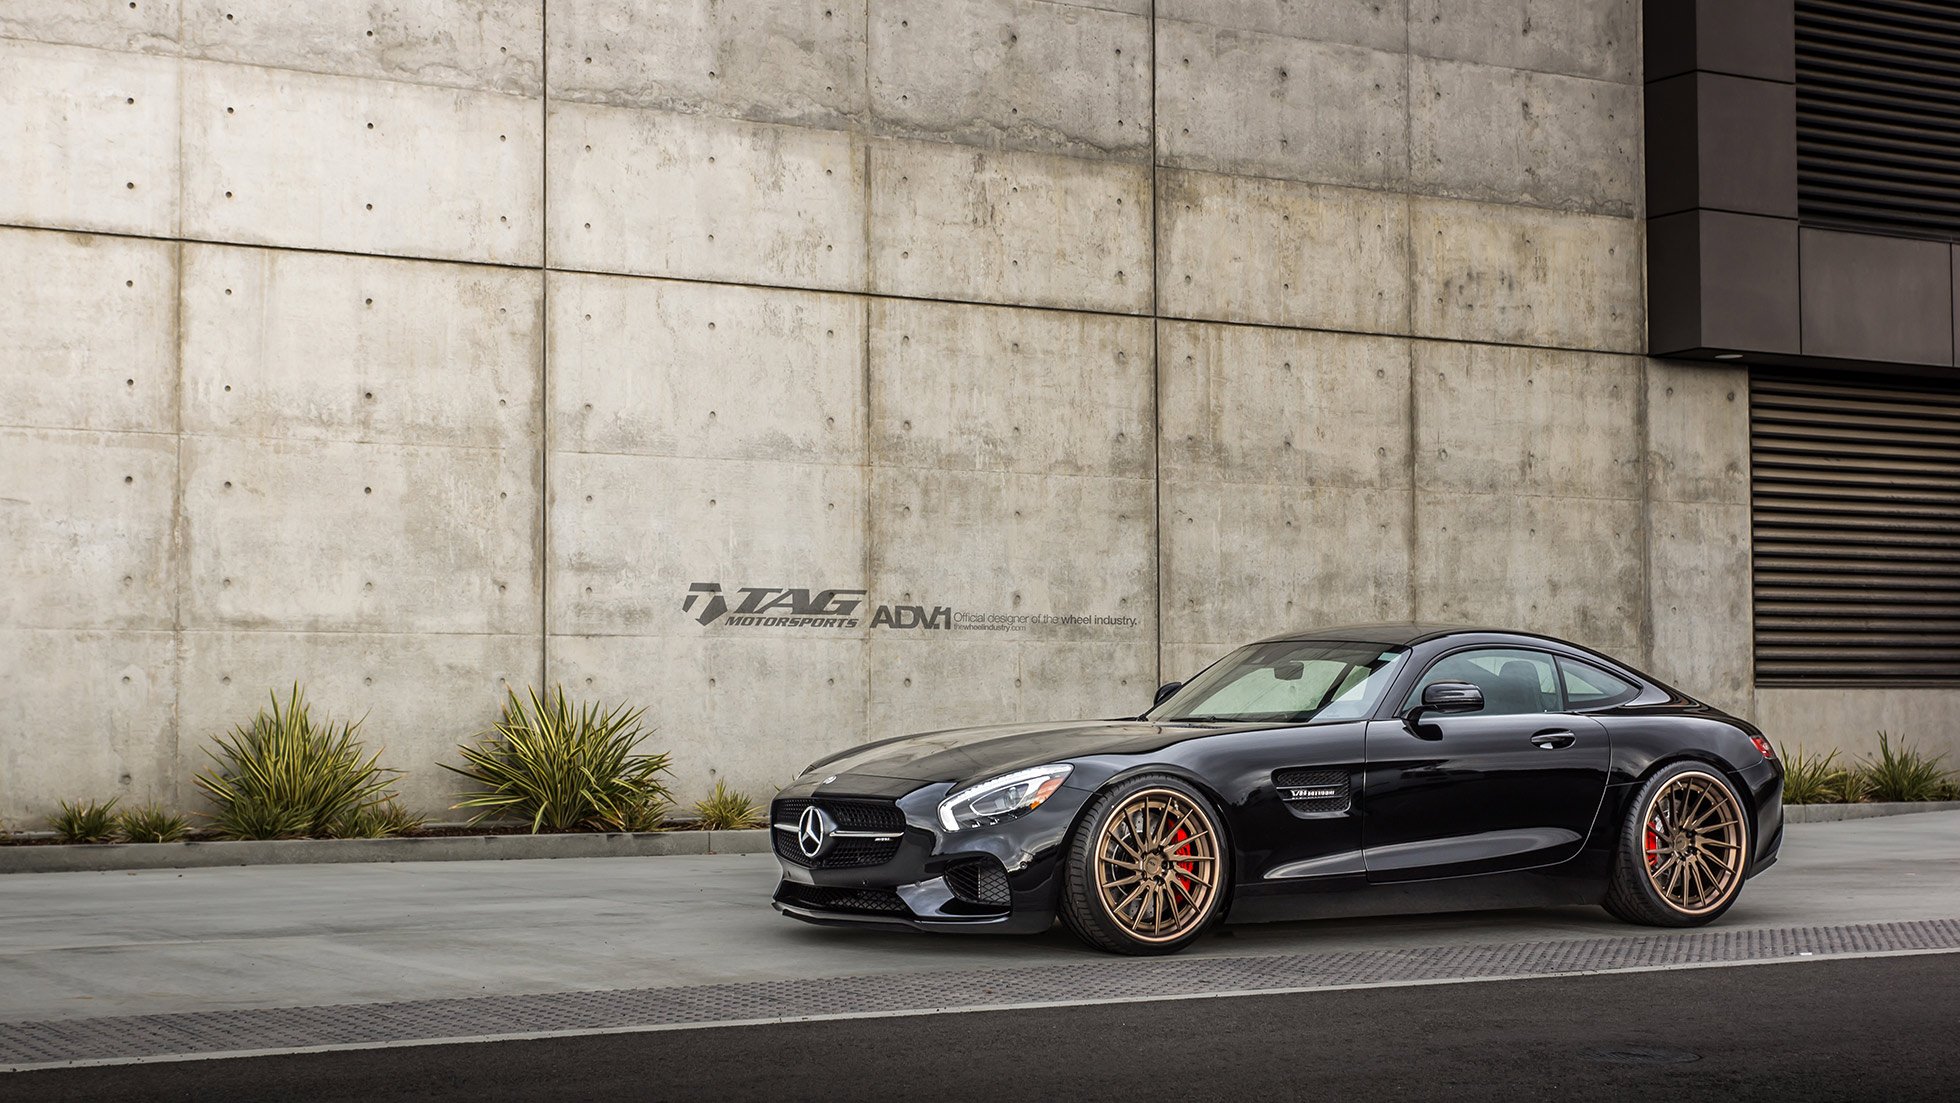 adv, 1, Wheels, Mercedes, Benz, Amg, Gt s, Coupe, Cars, Tuning, Black Wallpaper